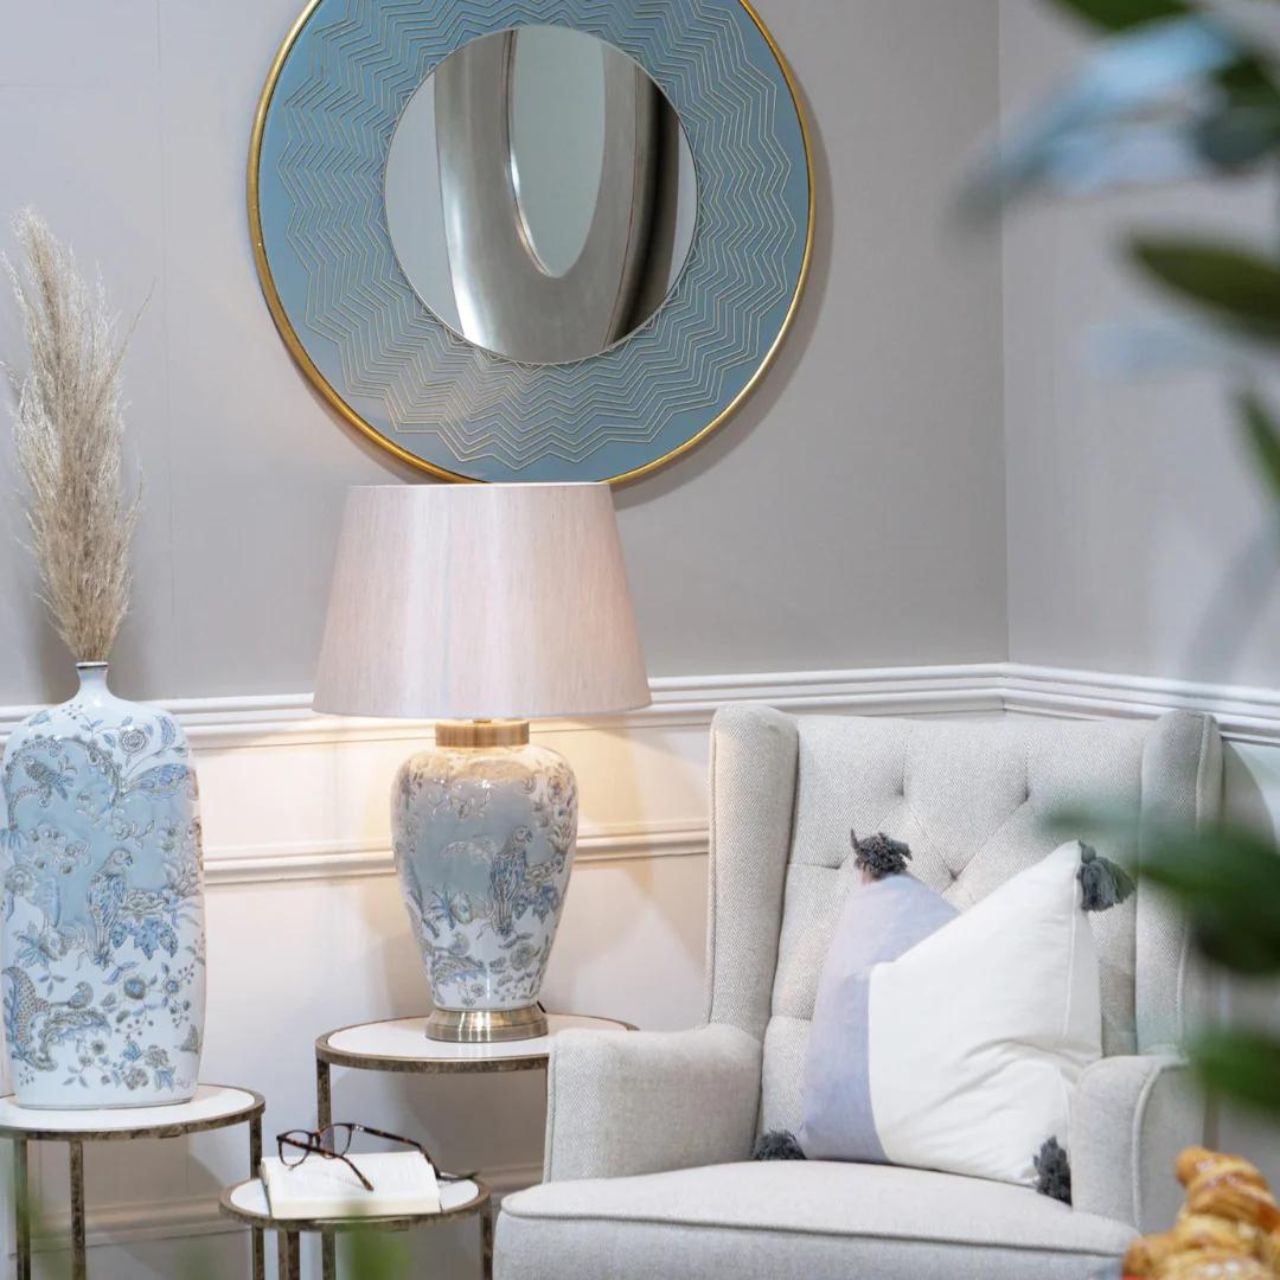 Liana Mirror by Mindy Brownes  - A trendy and fun way to add a pop of colour to your home. - Miami vibes, a stylish round mirror with a powder blue finish and gold geometric details. - The perfect choice for a bathroom, hallway, bedroom, living or dining room.